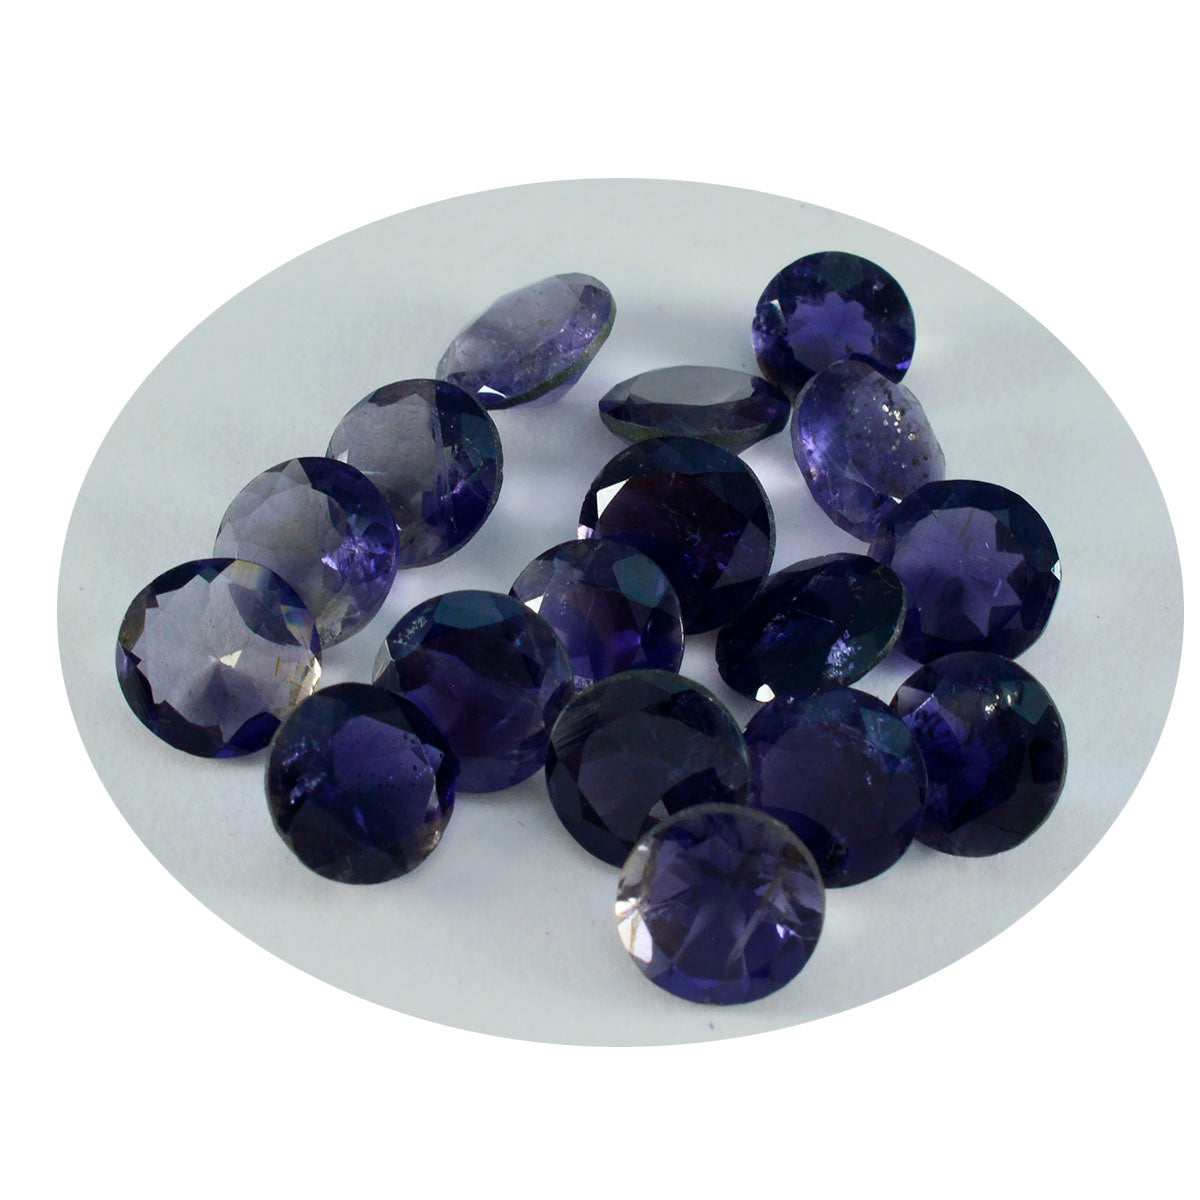 Riyogems 1PC Blue Iolite Faceted 7x7 mm Round Shape great Quality Loose Stone